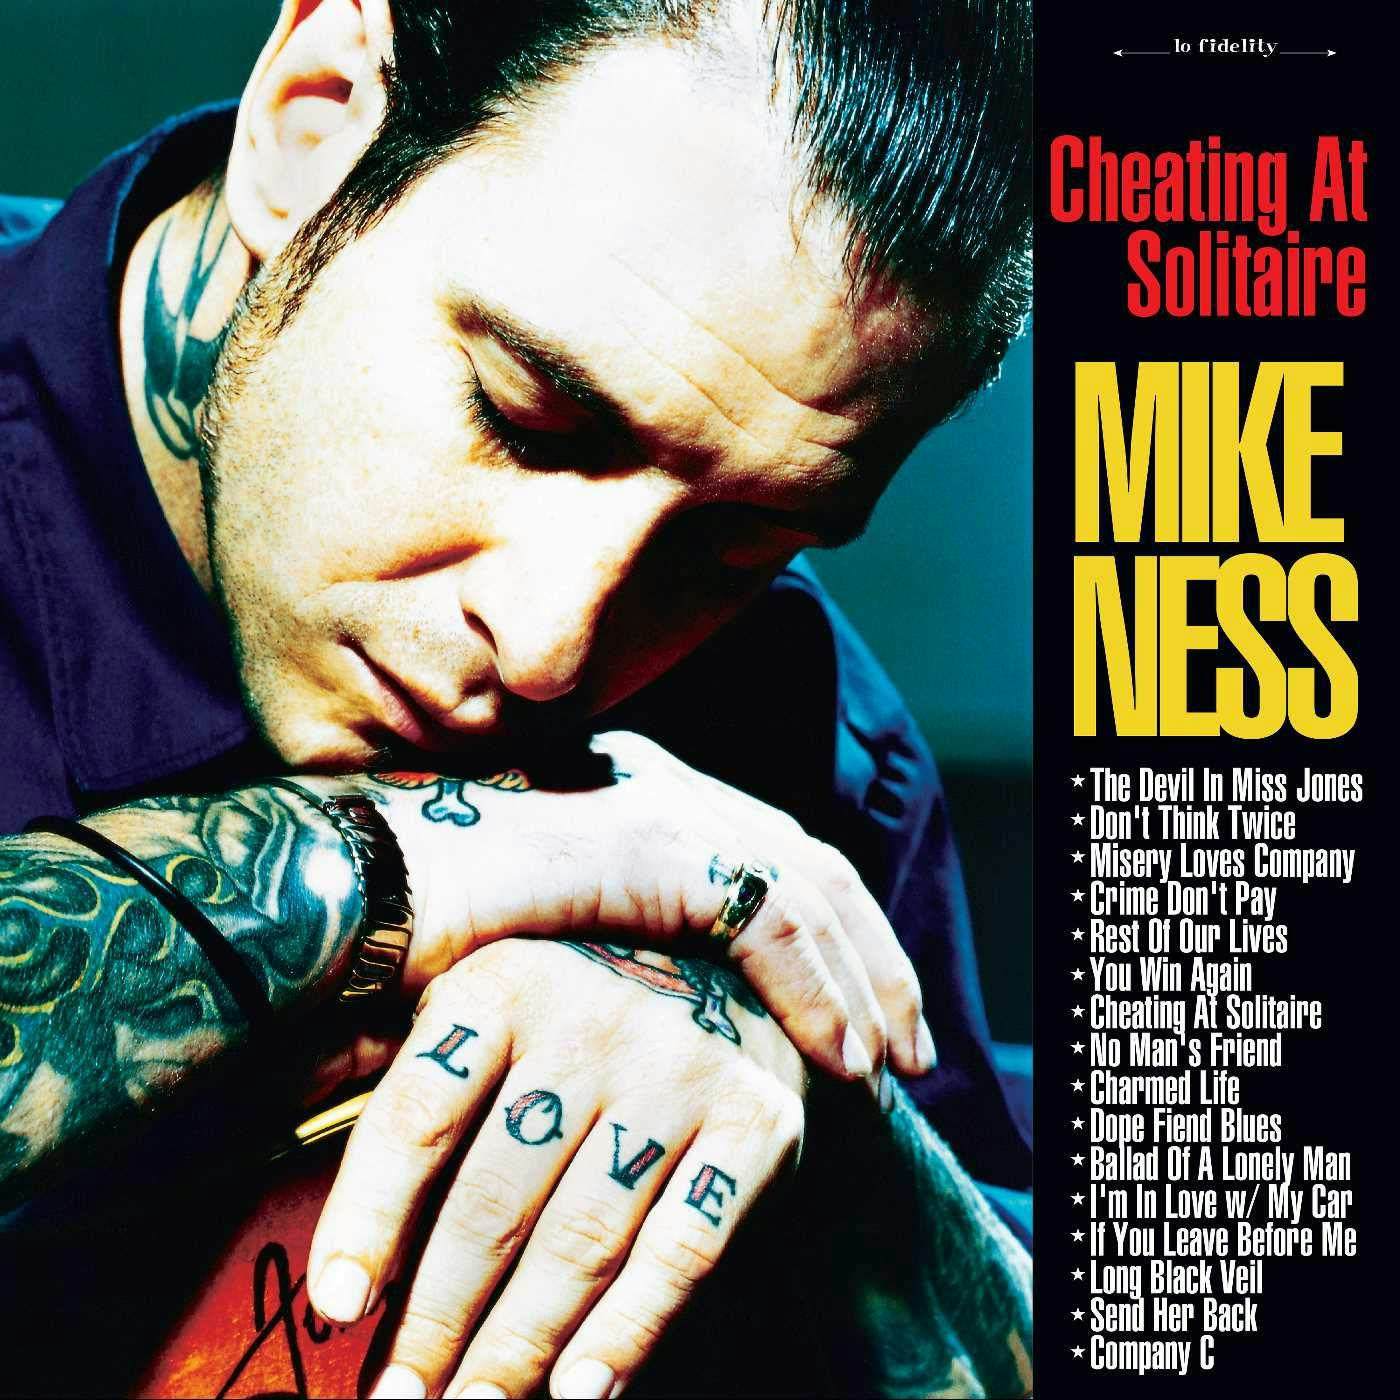 Mike Ness Cheating At Solitaire (2 LP) Vinyl Record